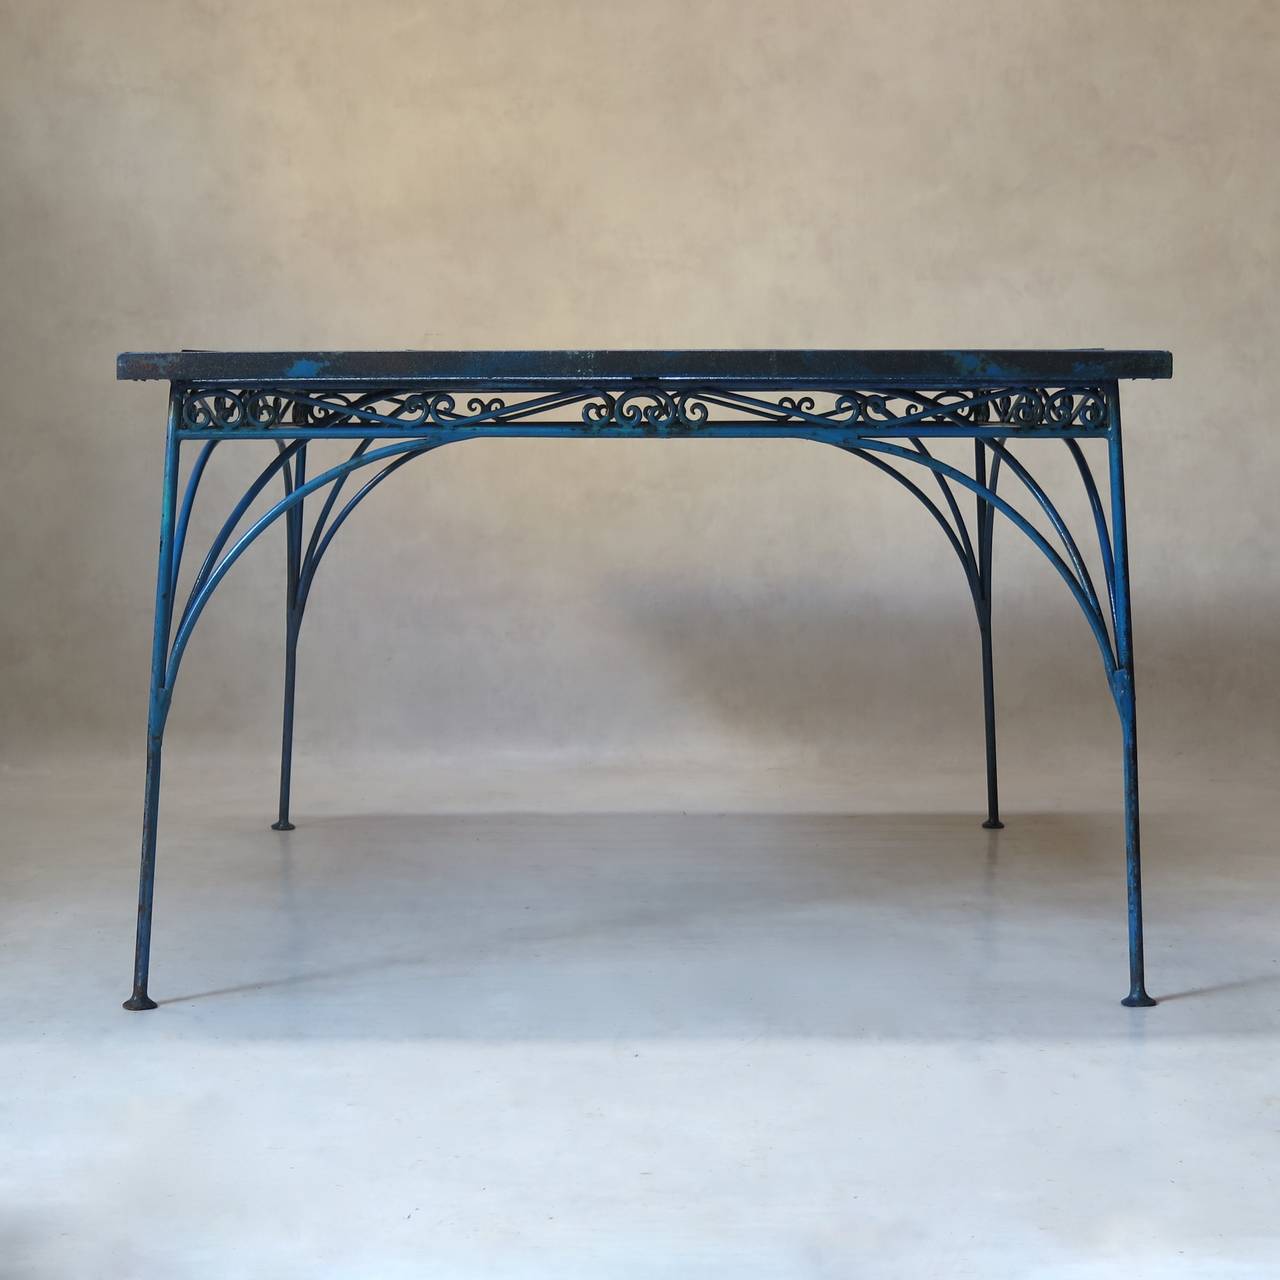 20th Century Lovely French 1930s Wrought Iron and Wood Garden Table with Four Armchairs